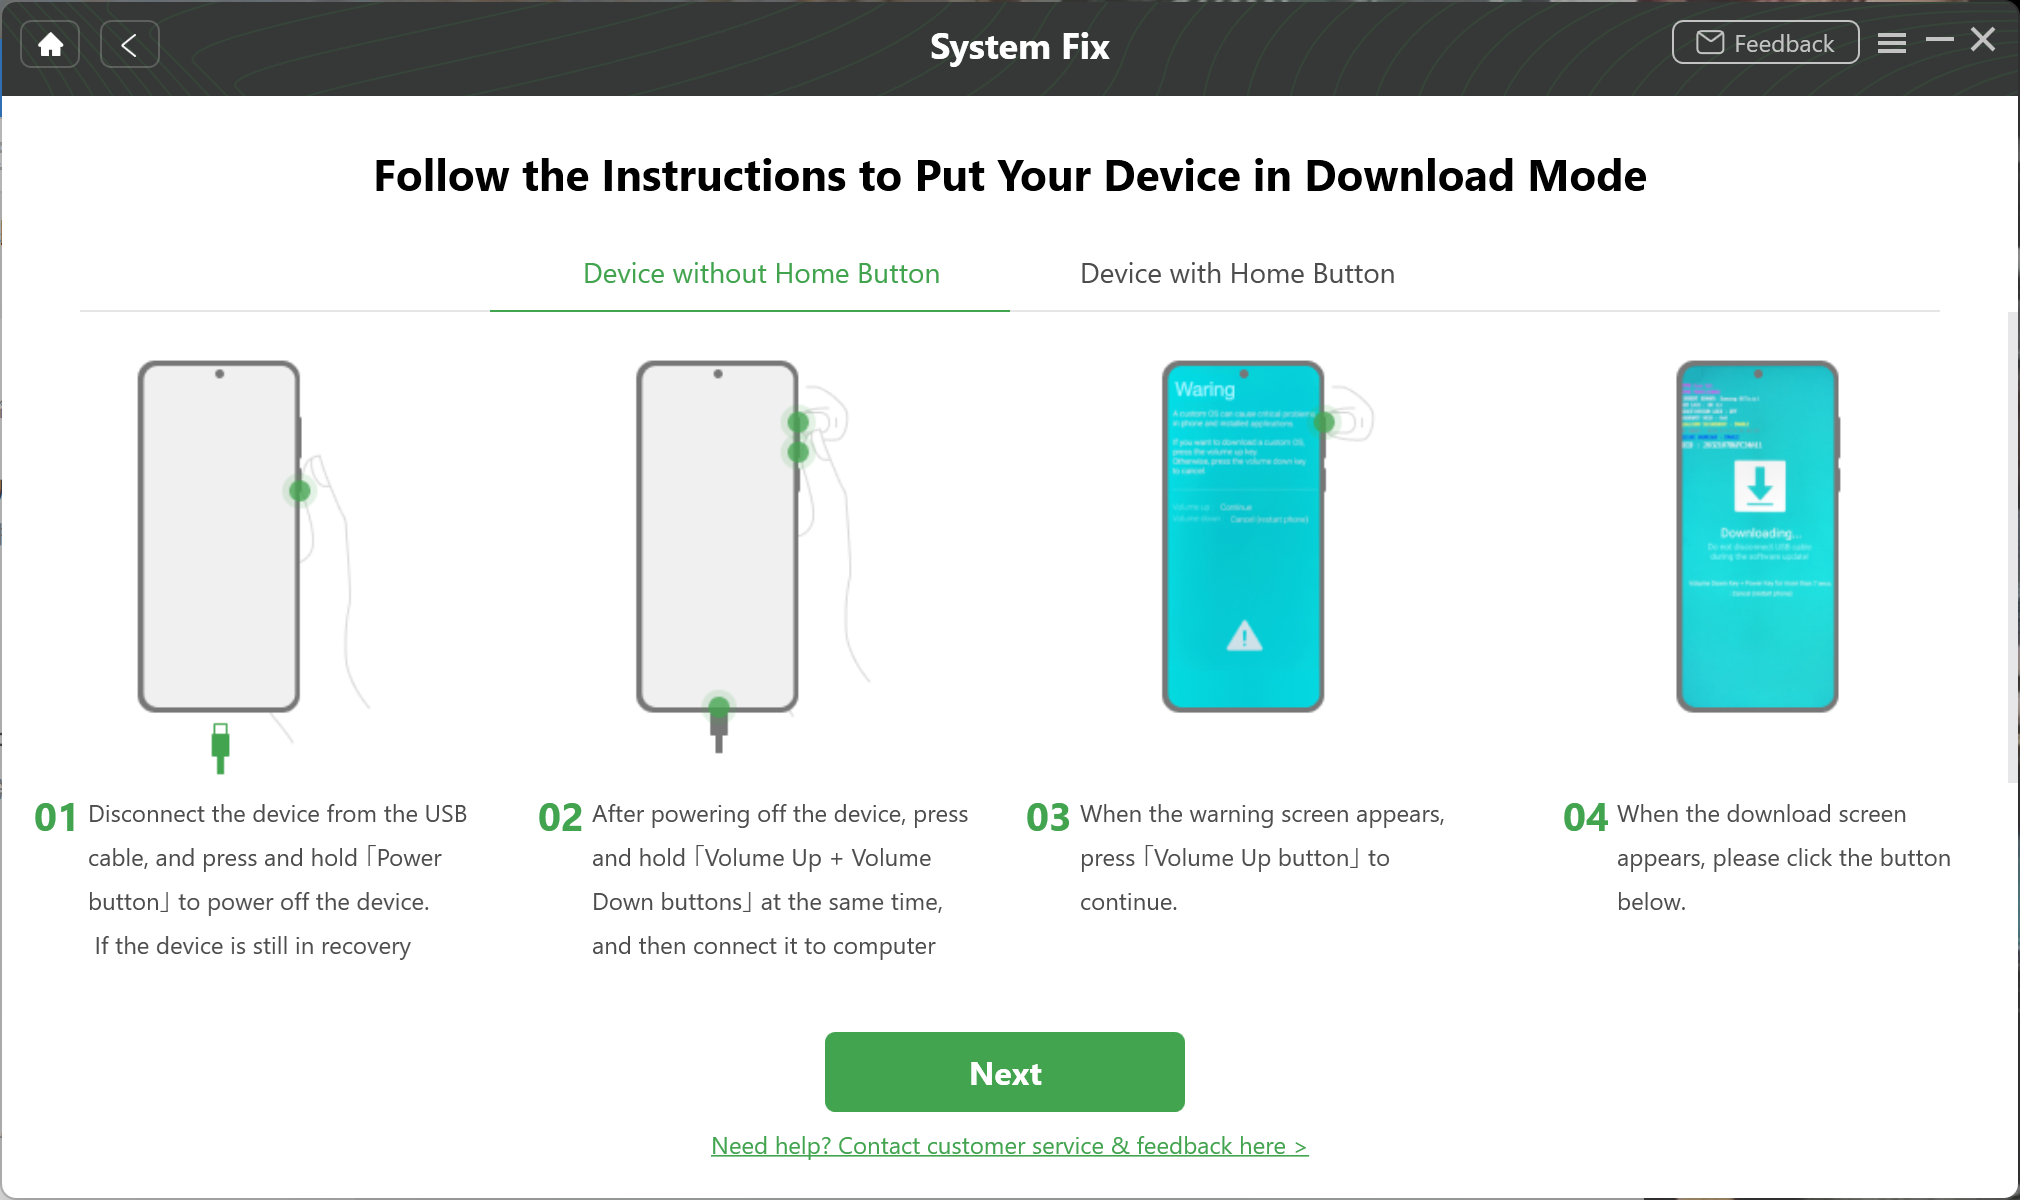 Put Your Device in Download Mode